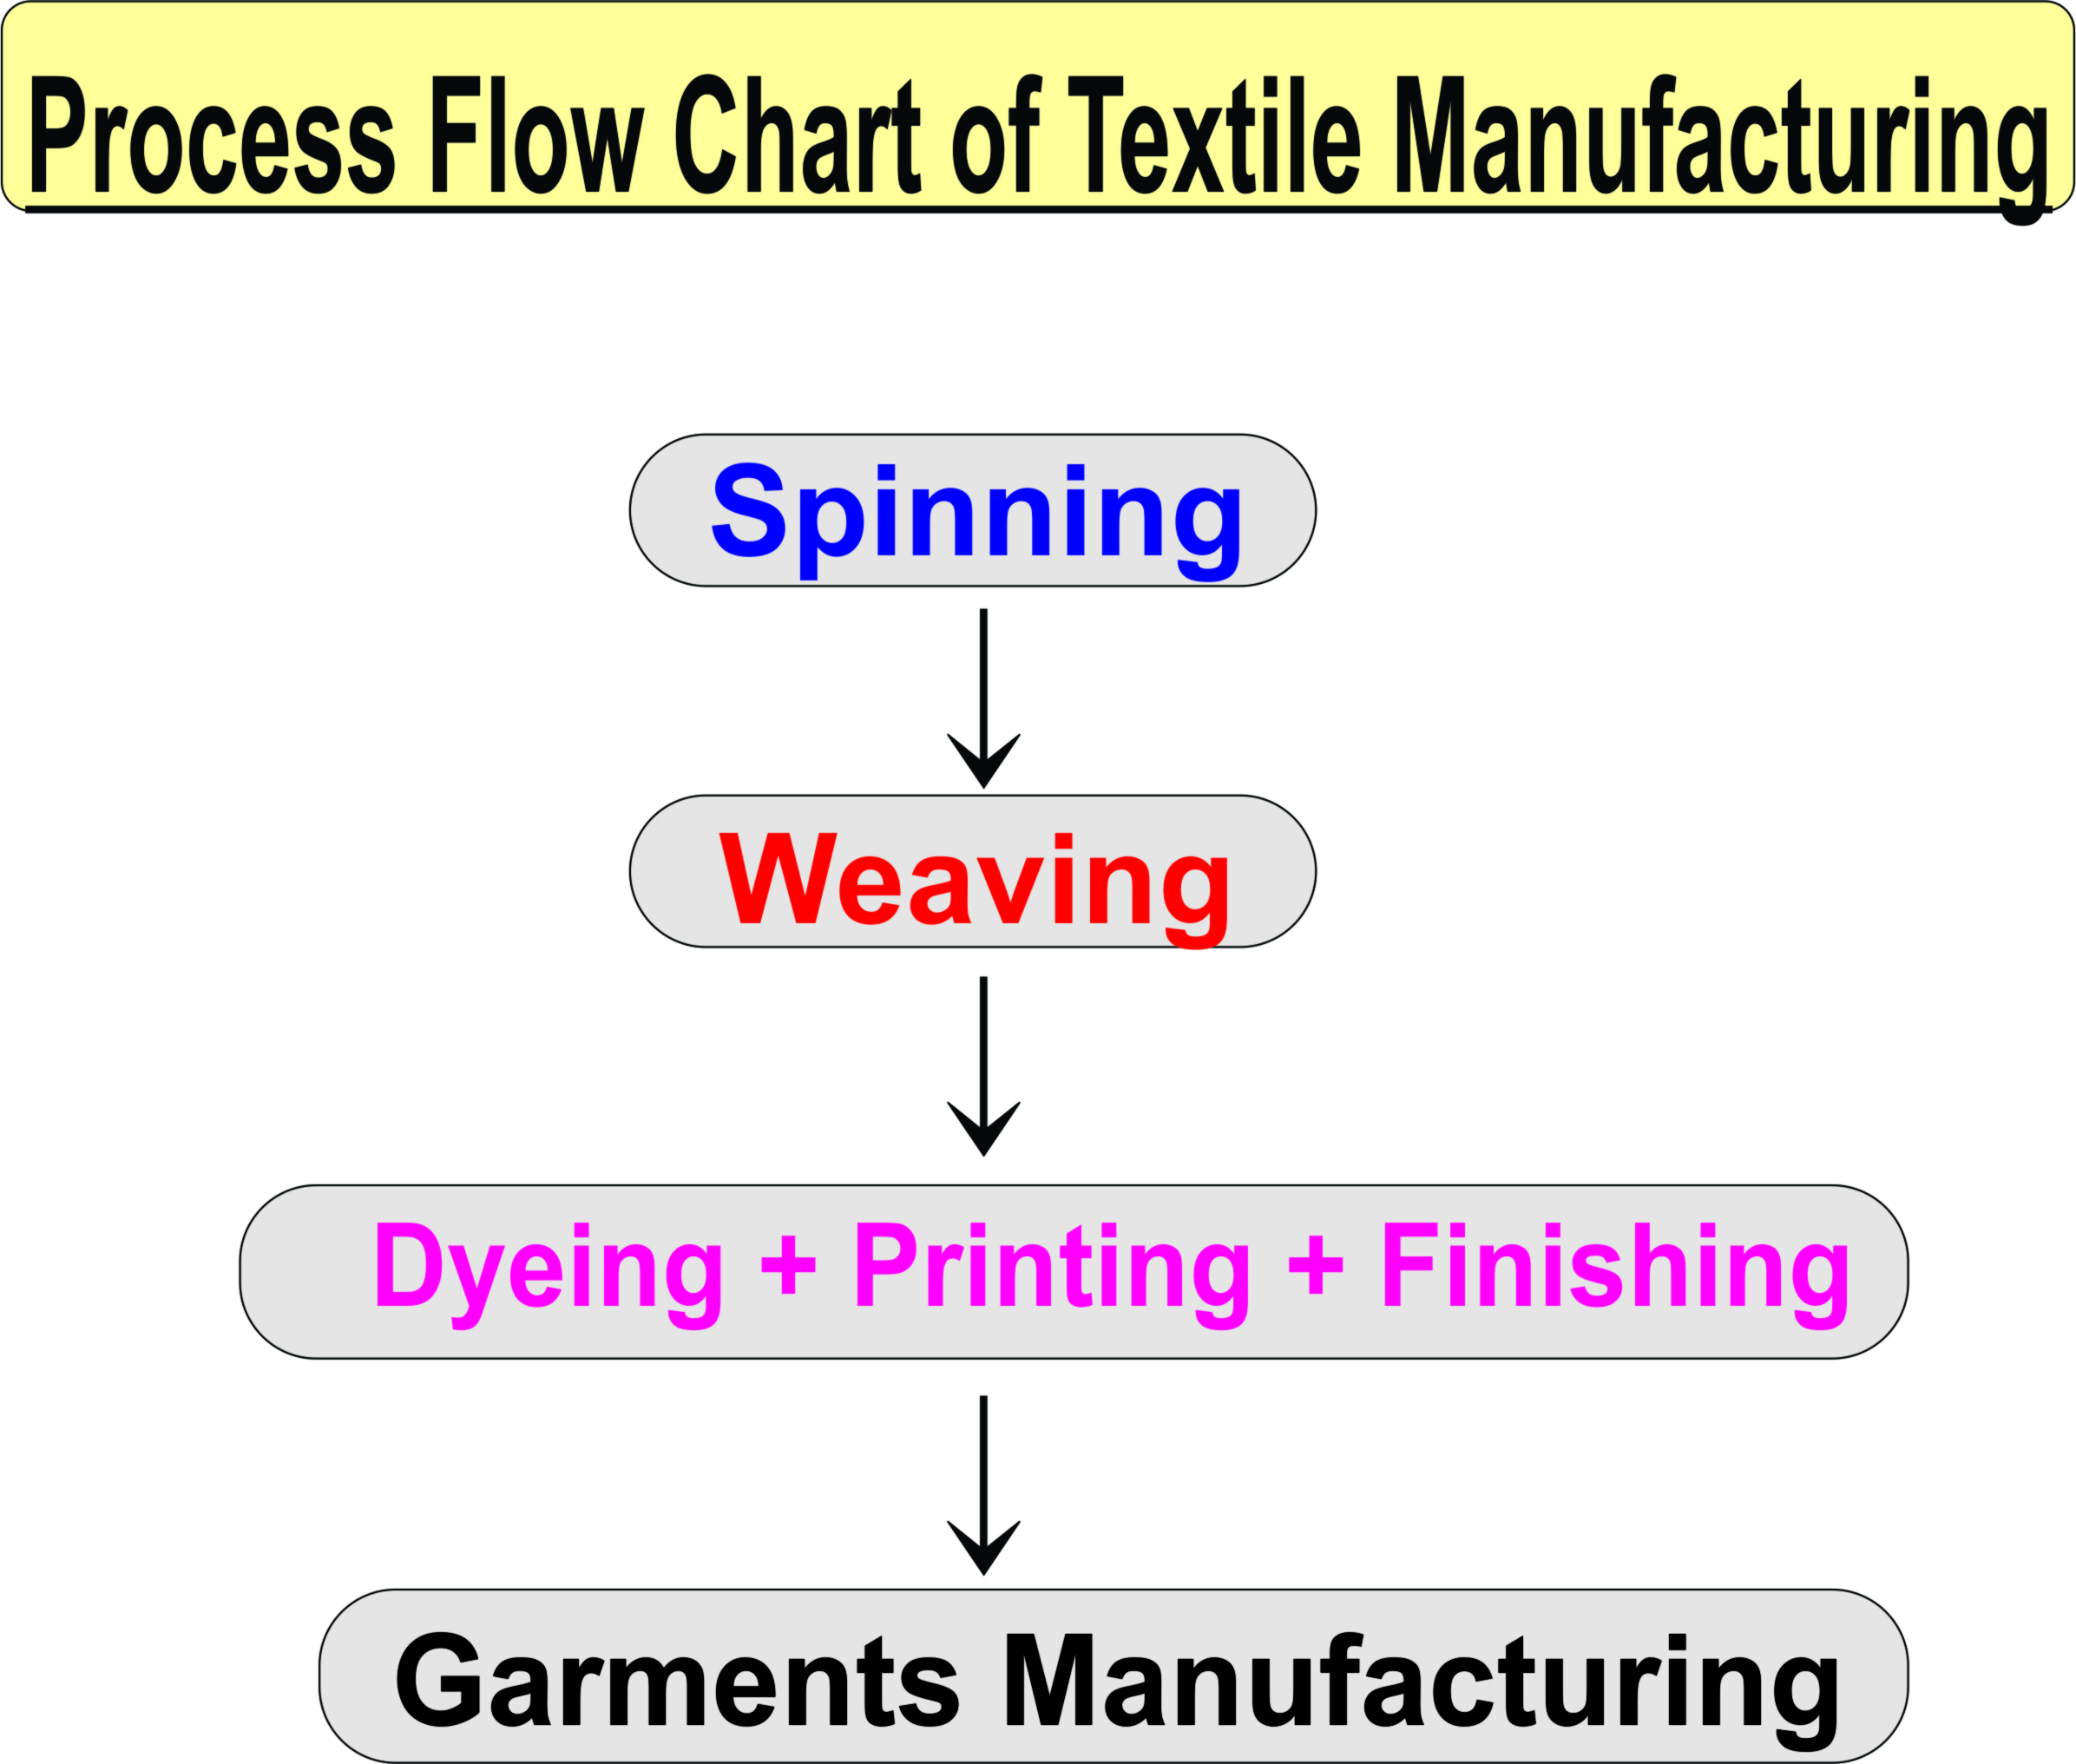 Flow Chart of Textile Manufacturing